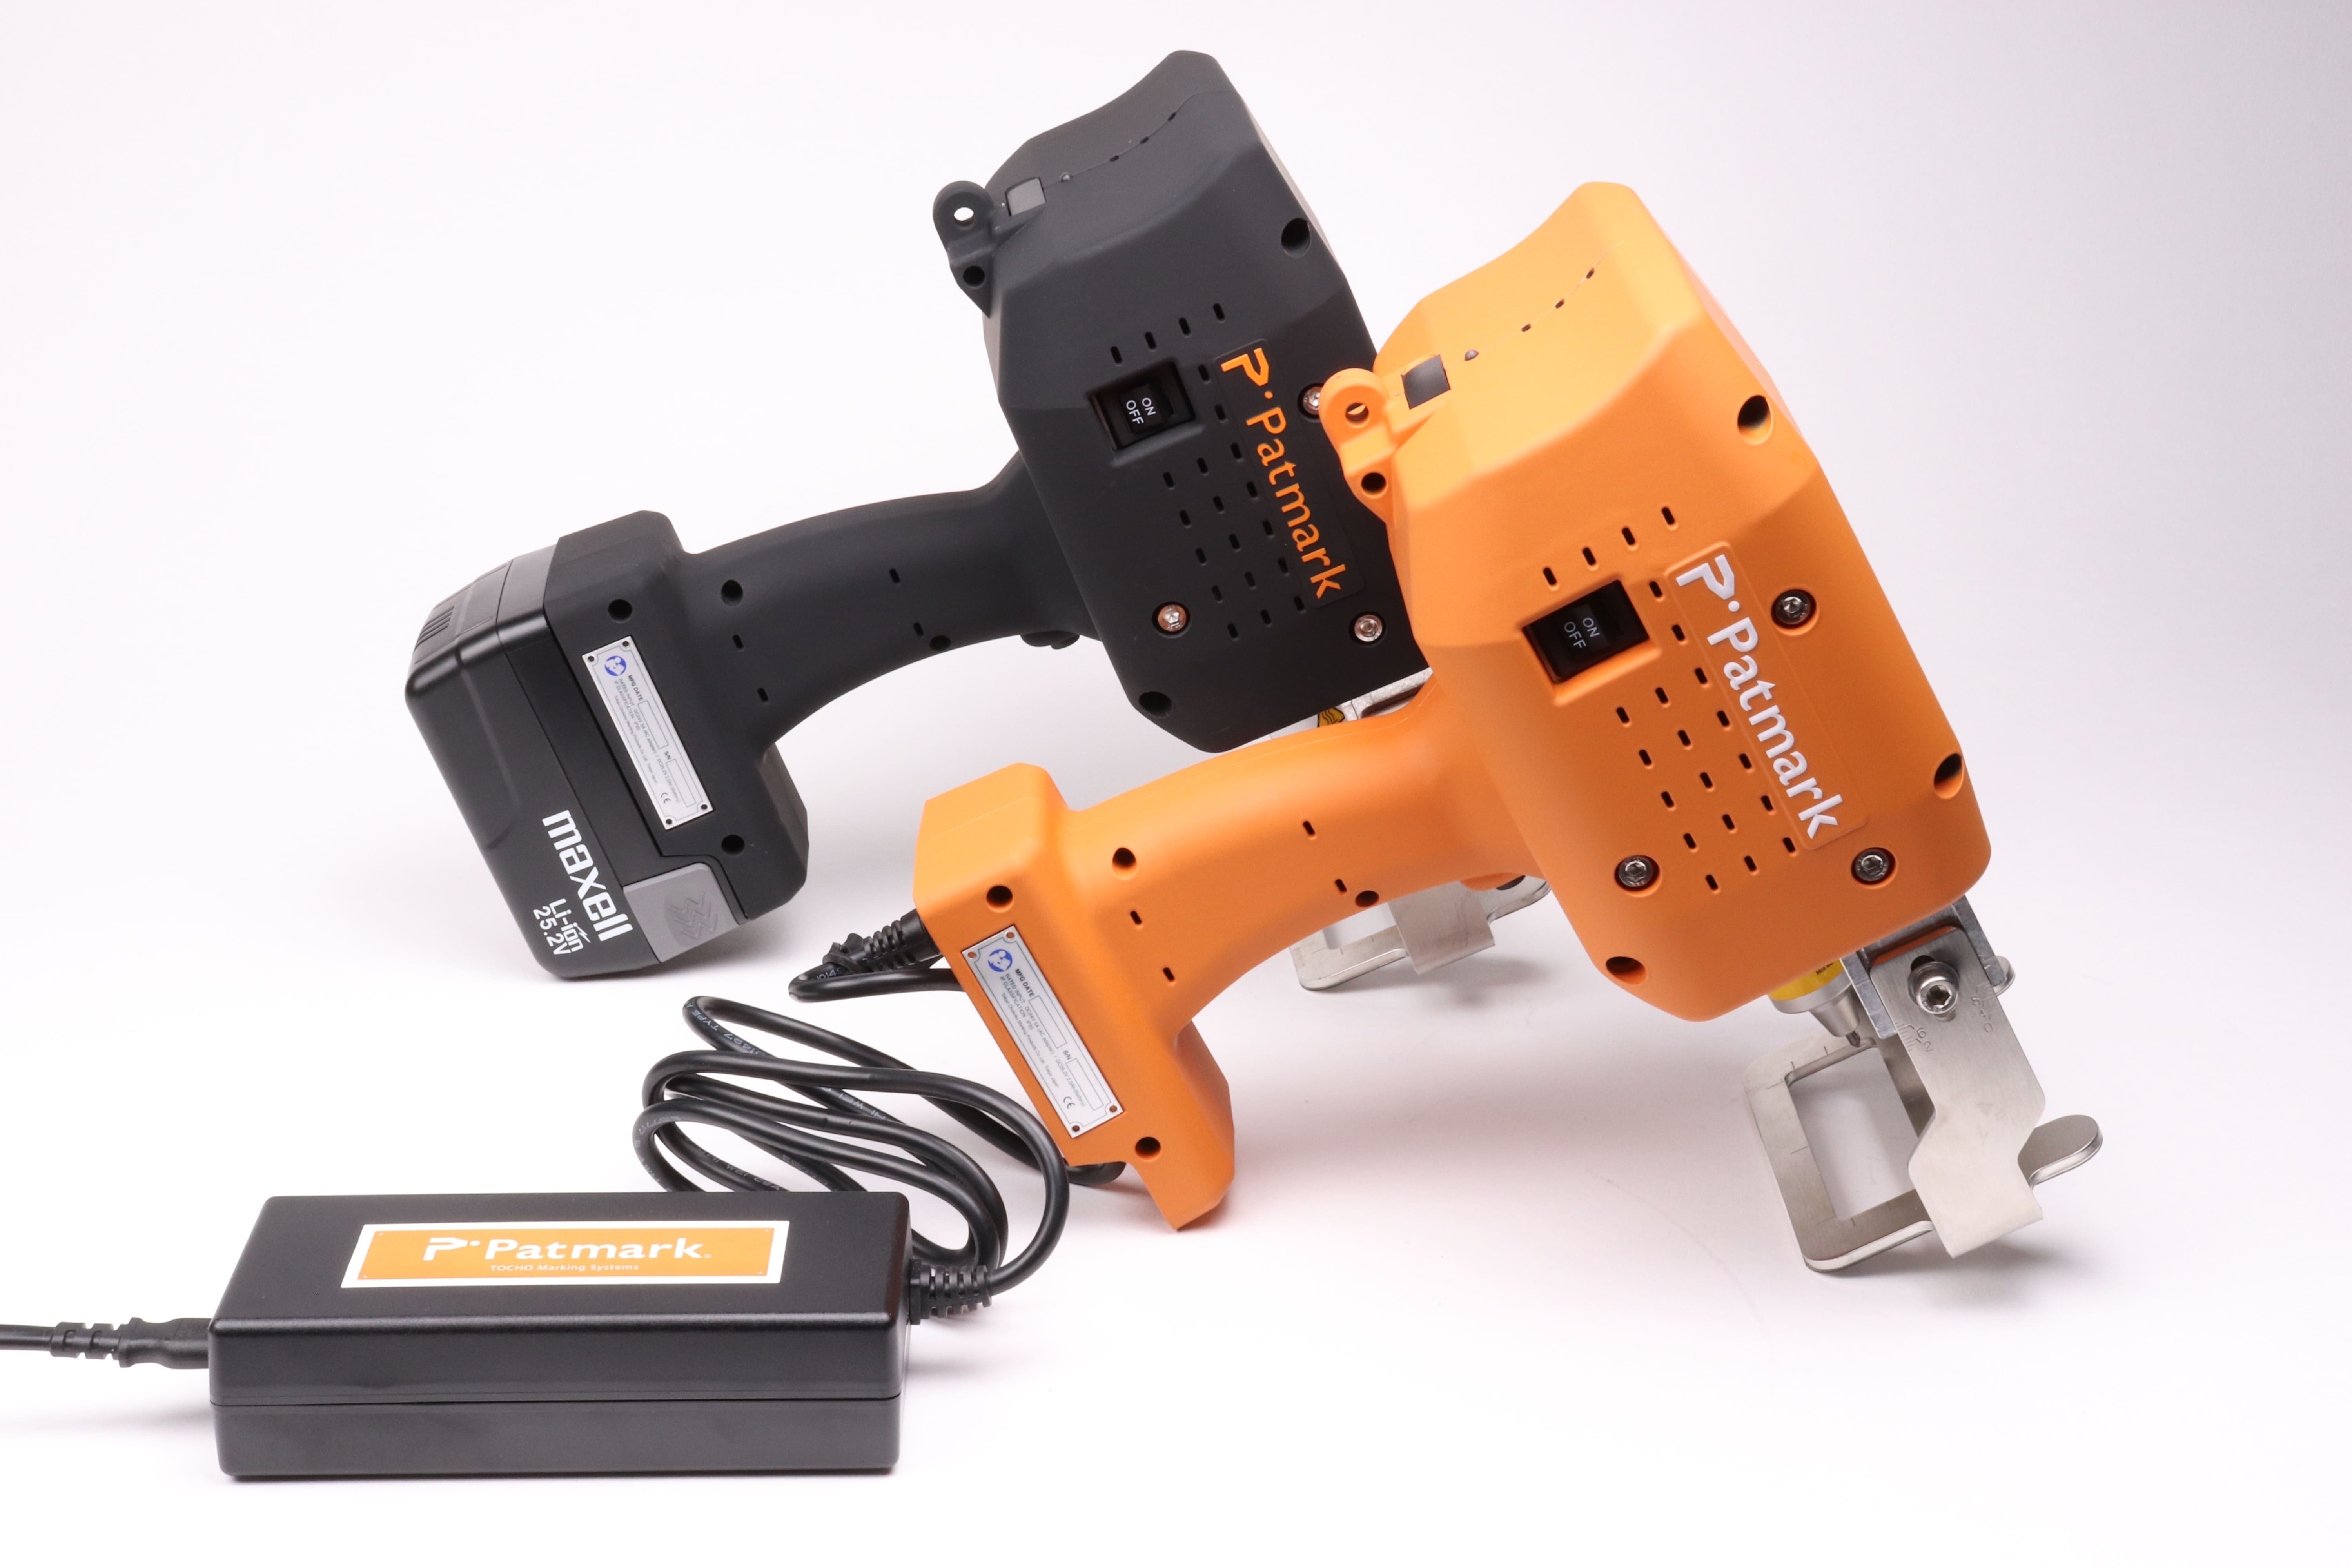 Image of two Patmark-plus units from the Patmark series, one in orange and one in black, placed side by side. The black one is equipped with an adapter.